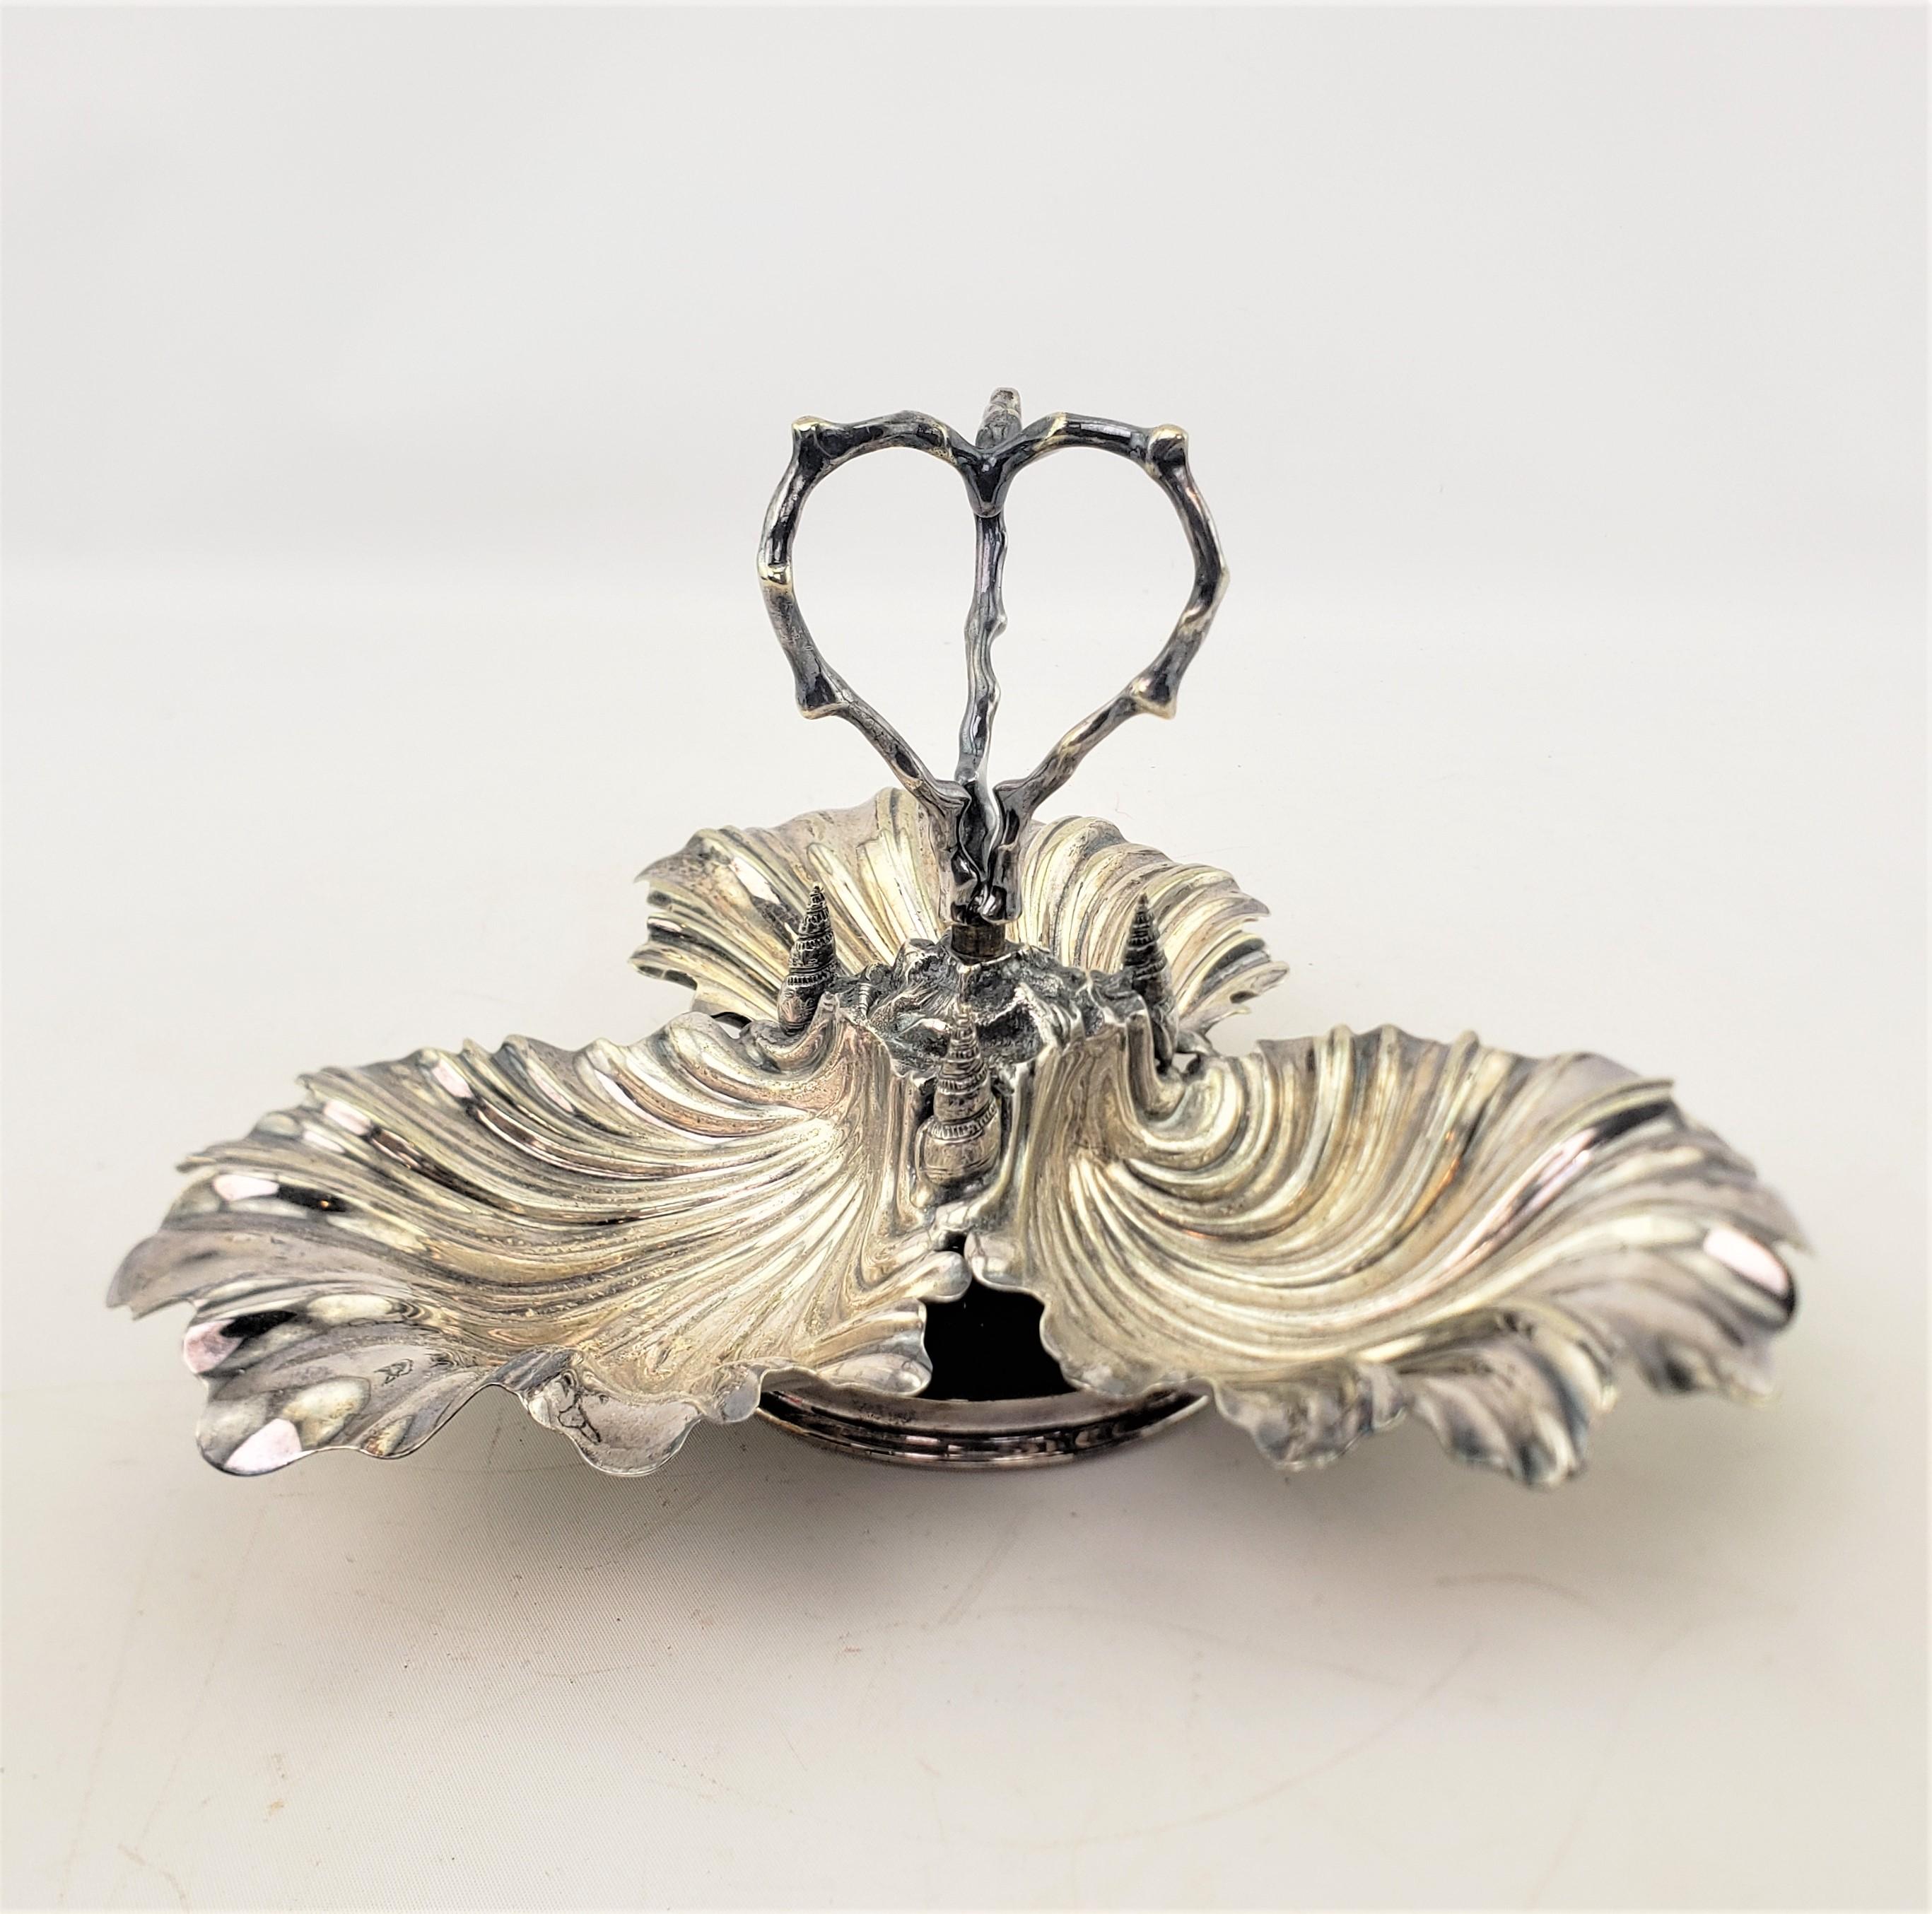 20th Century Antique English Silver Plated Partitioned Serving Bowl or Condiment Dish For Sale